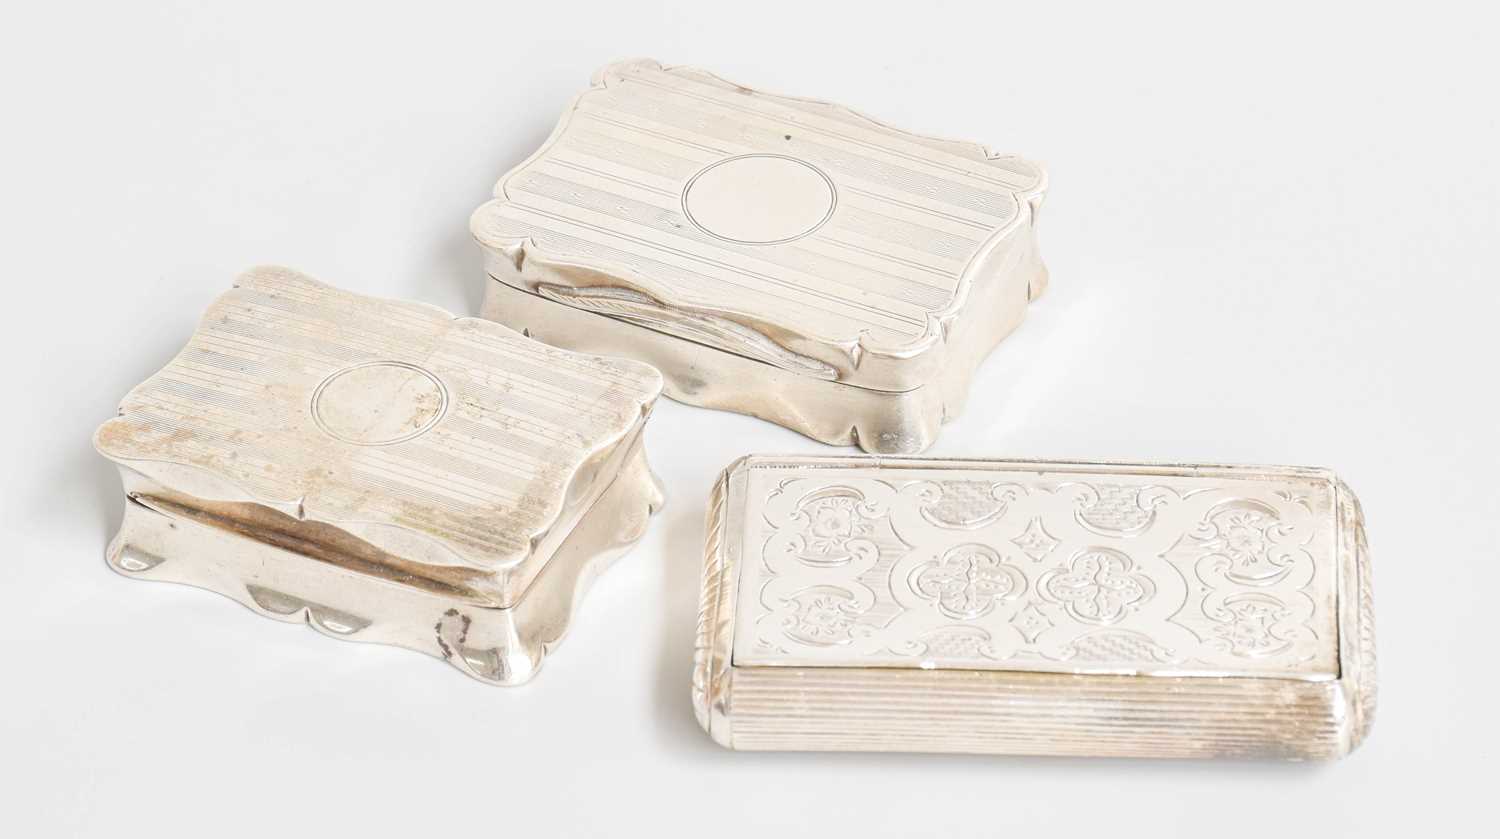 Two George V Silver Snuff-Boxes, One by Colen Hewer Cheshire, Chester, 1919 and One by Smith and